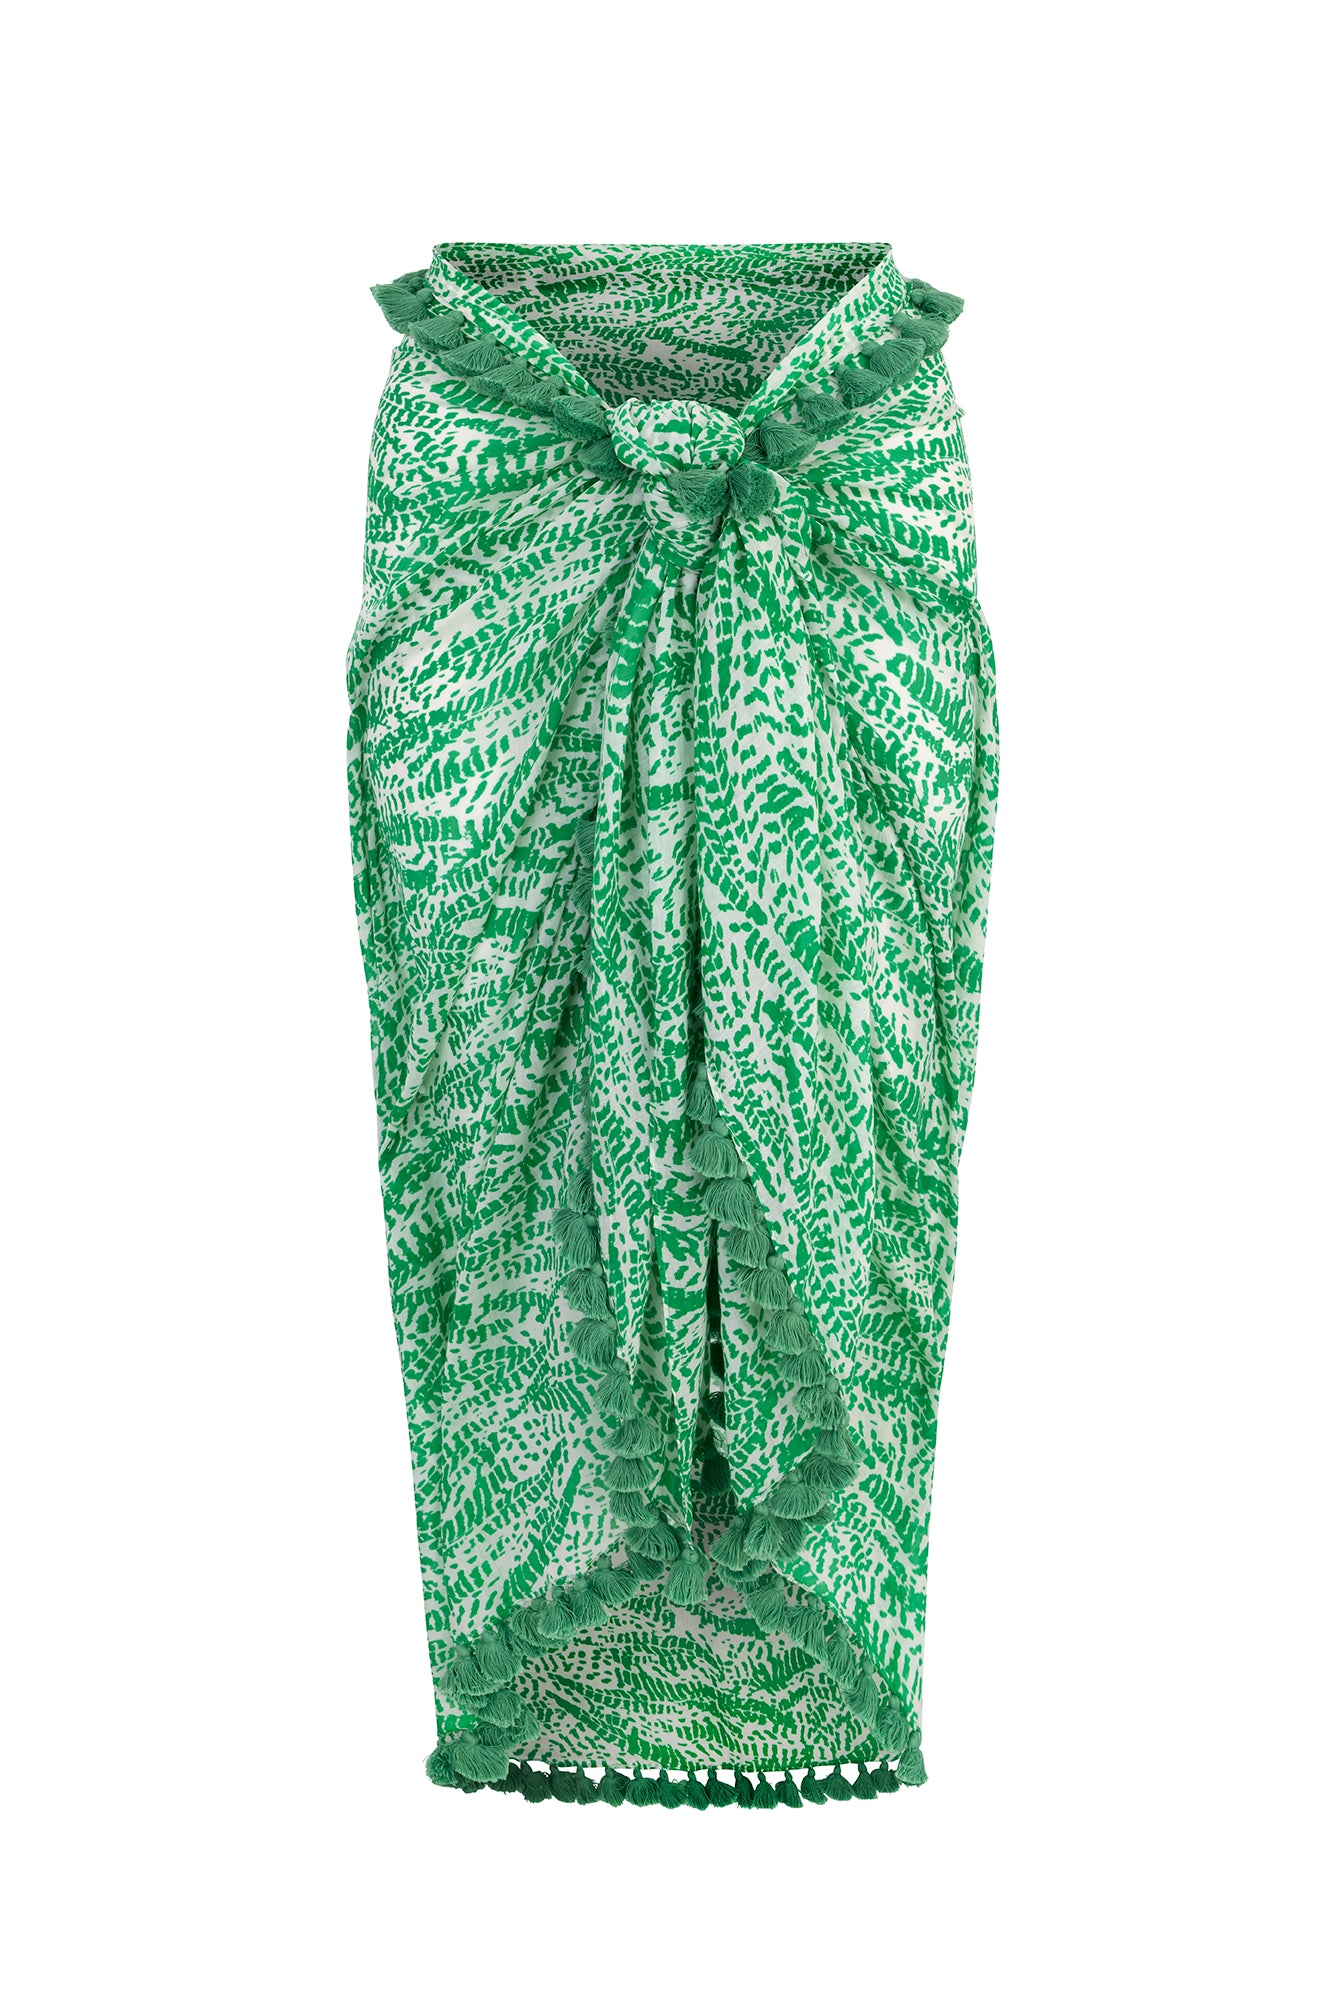 Belle Mare Sarong